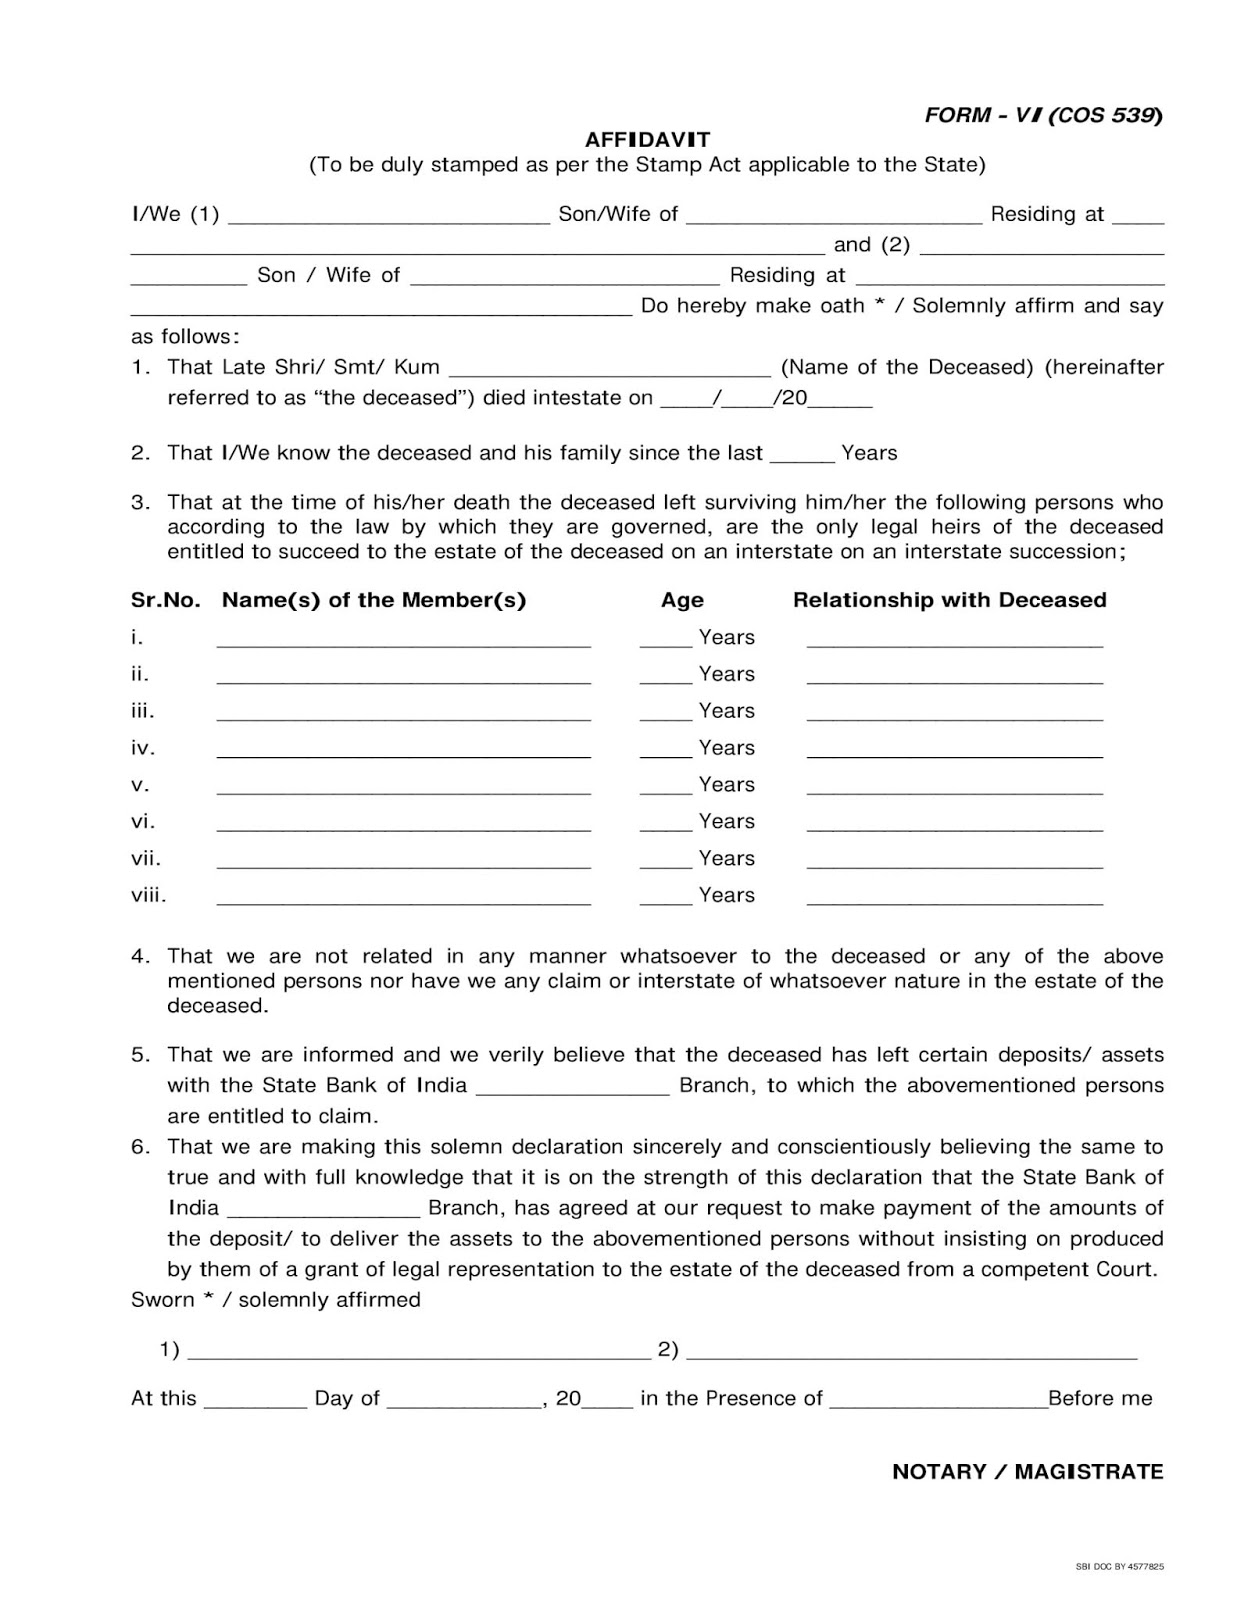 Forms19: APPLICATION FOR SELLEMENTS OF DECEASED ASSETS